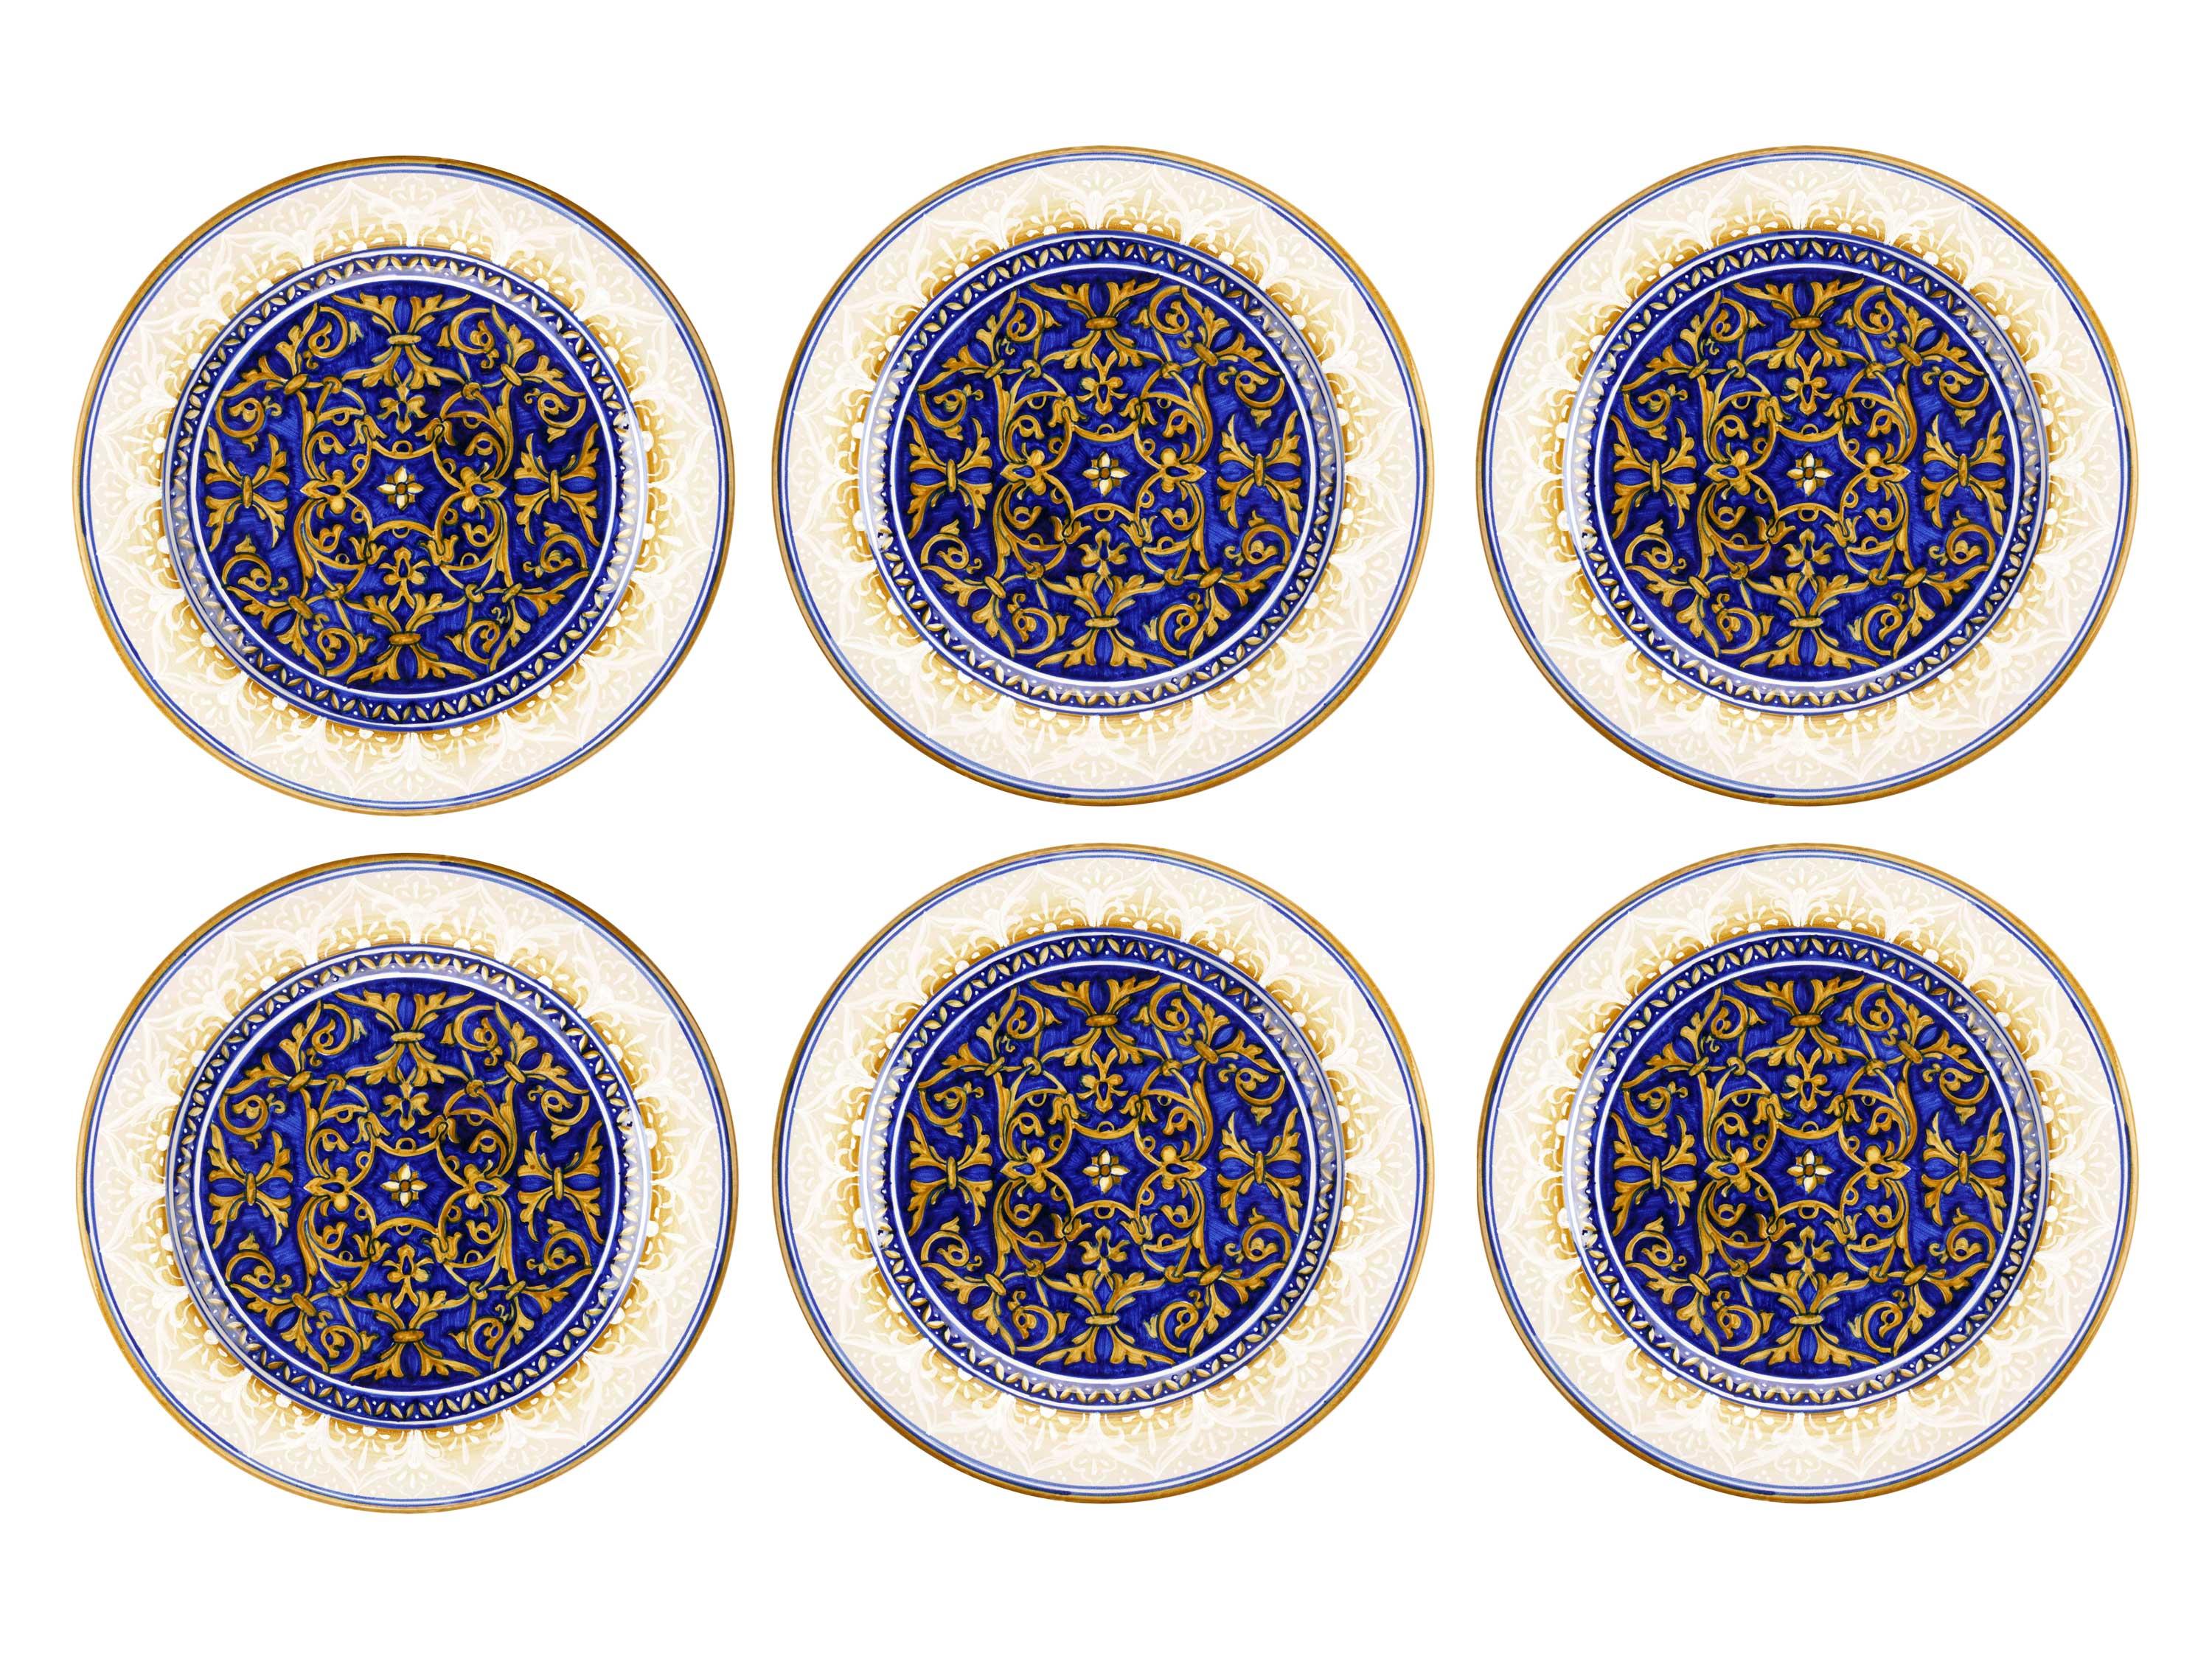 This magnificent set of 6 majolica charger plates is handmade and hand-painted in Italy following the original Renaissance painting technique, unchanged over time, which we observe to the letter.
The golden yellow damask decoration, typical of the